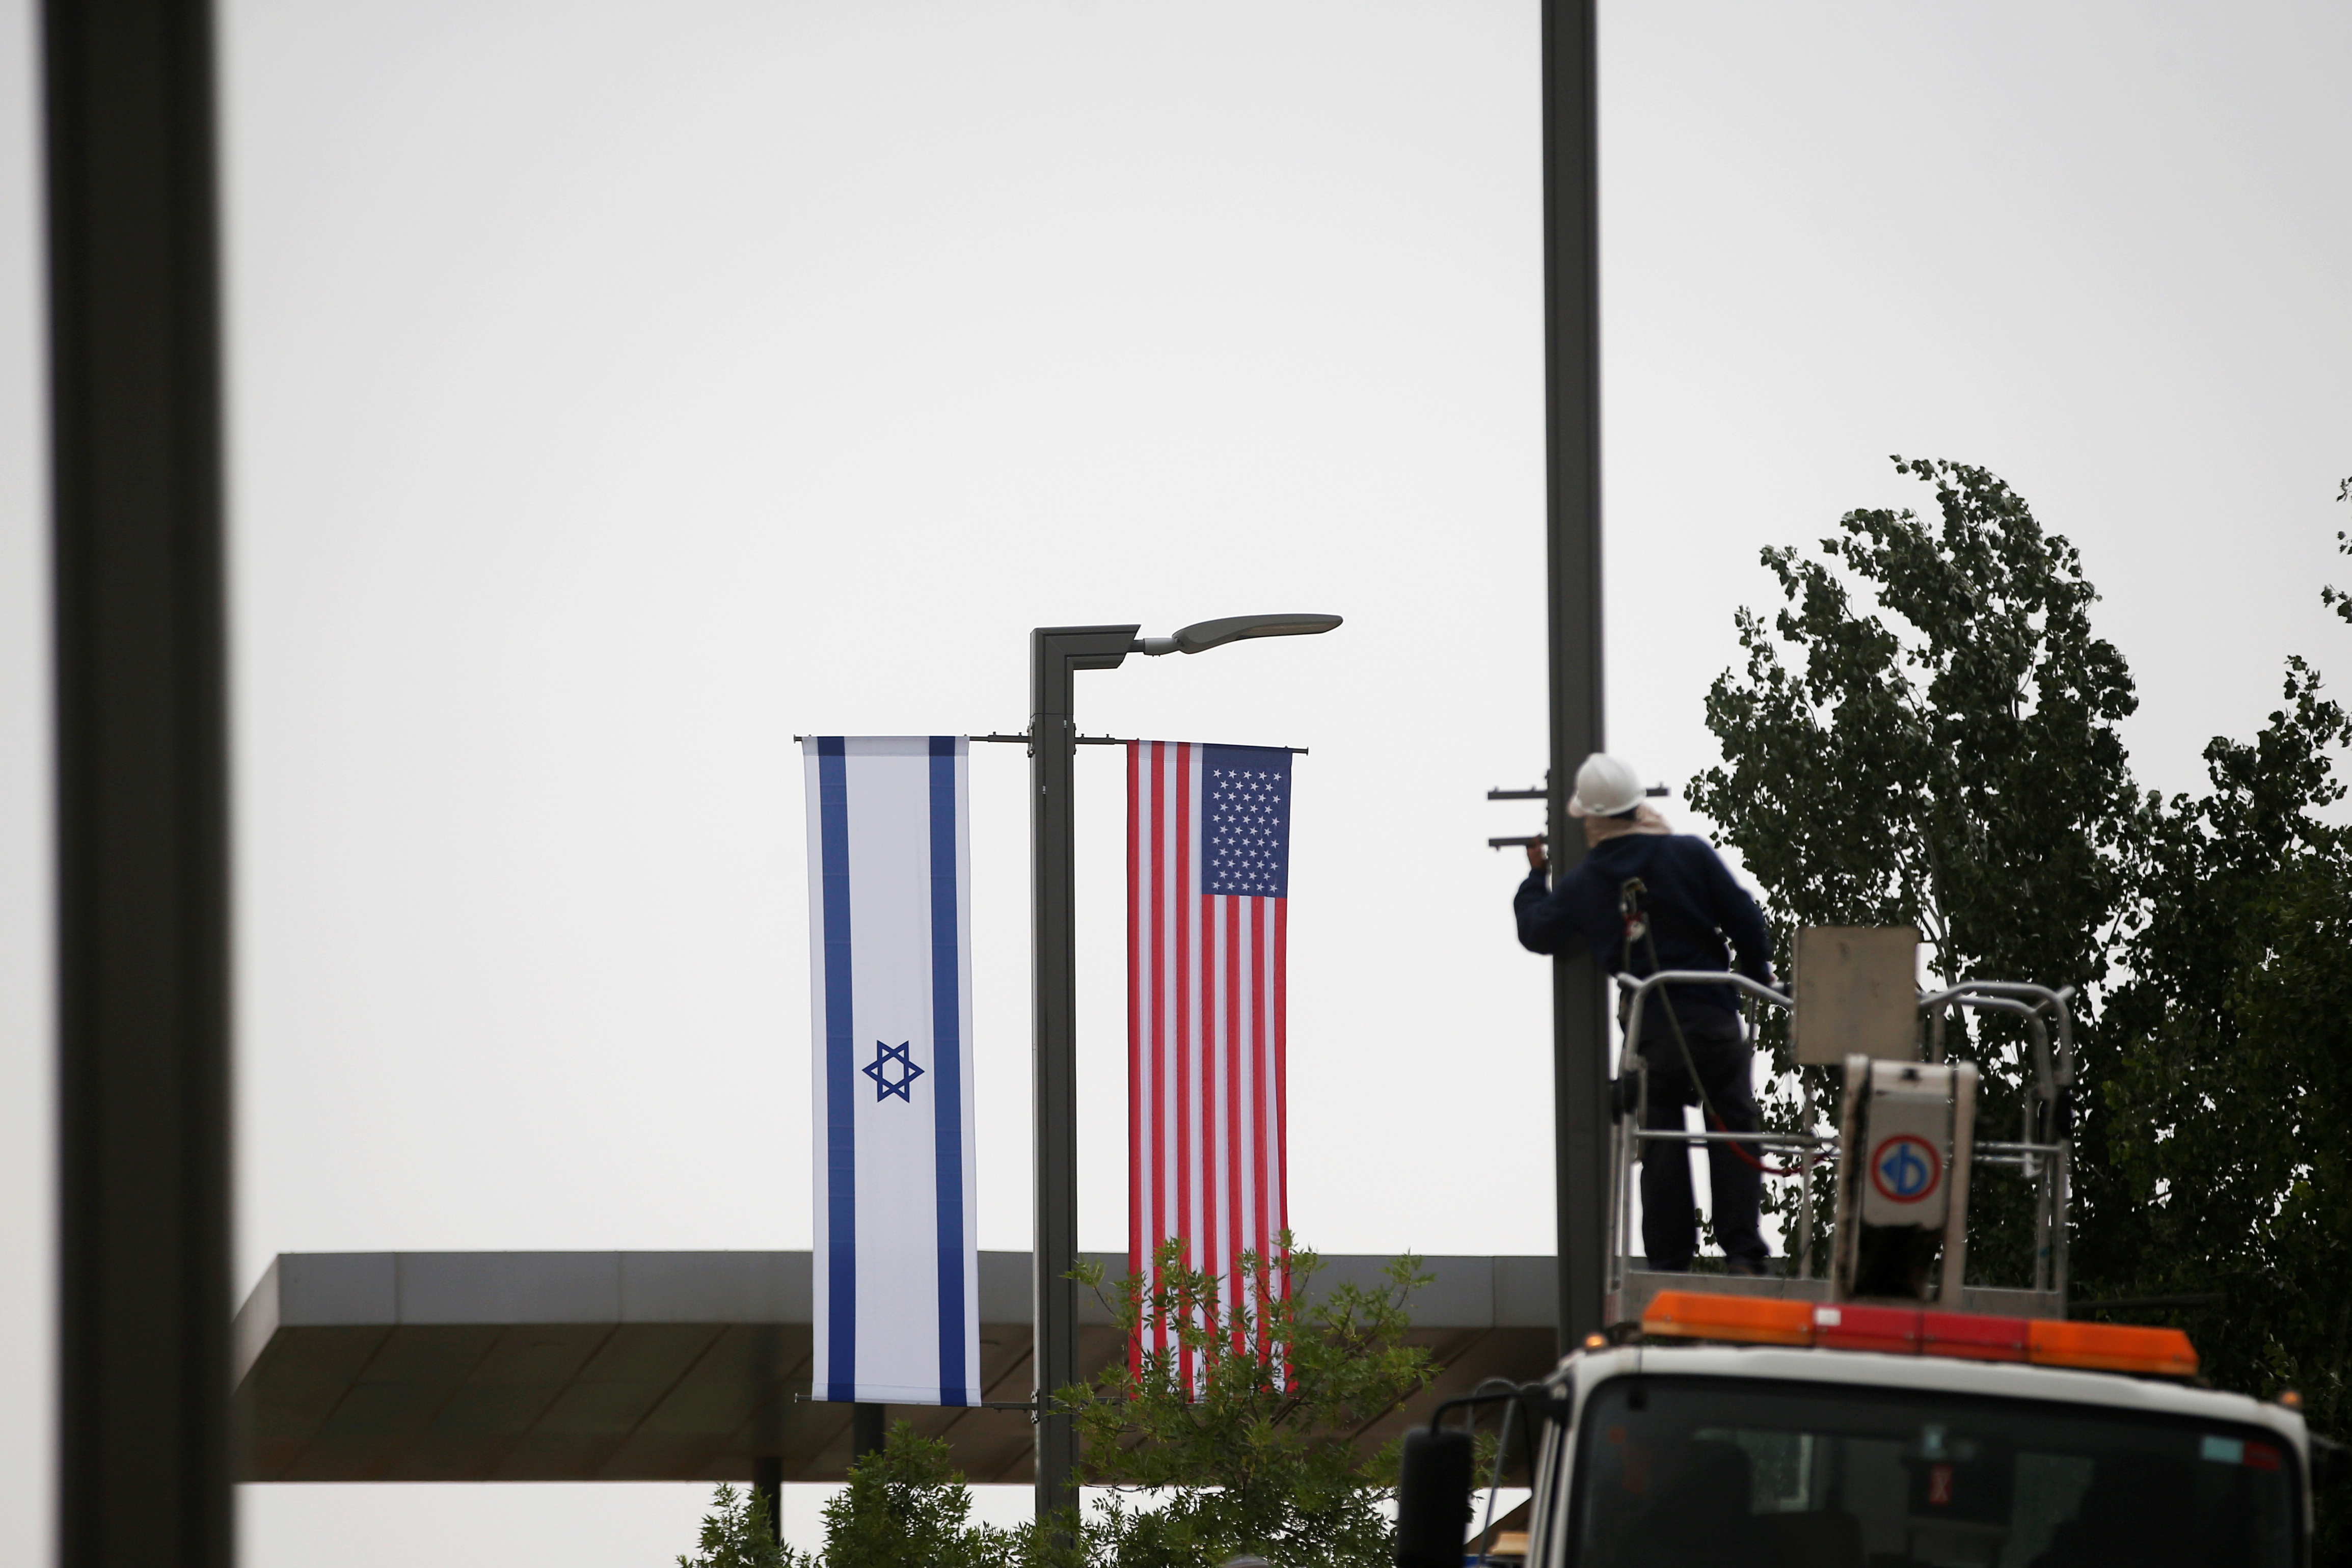 Israeli and U.S. flags hang next to the entrance to the U.S. consulate in Jerusalem